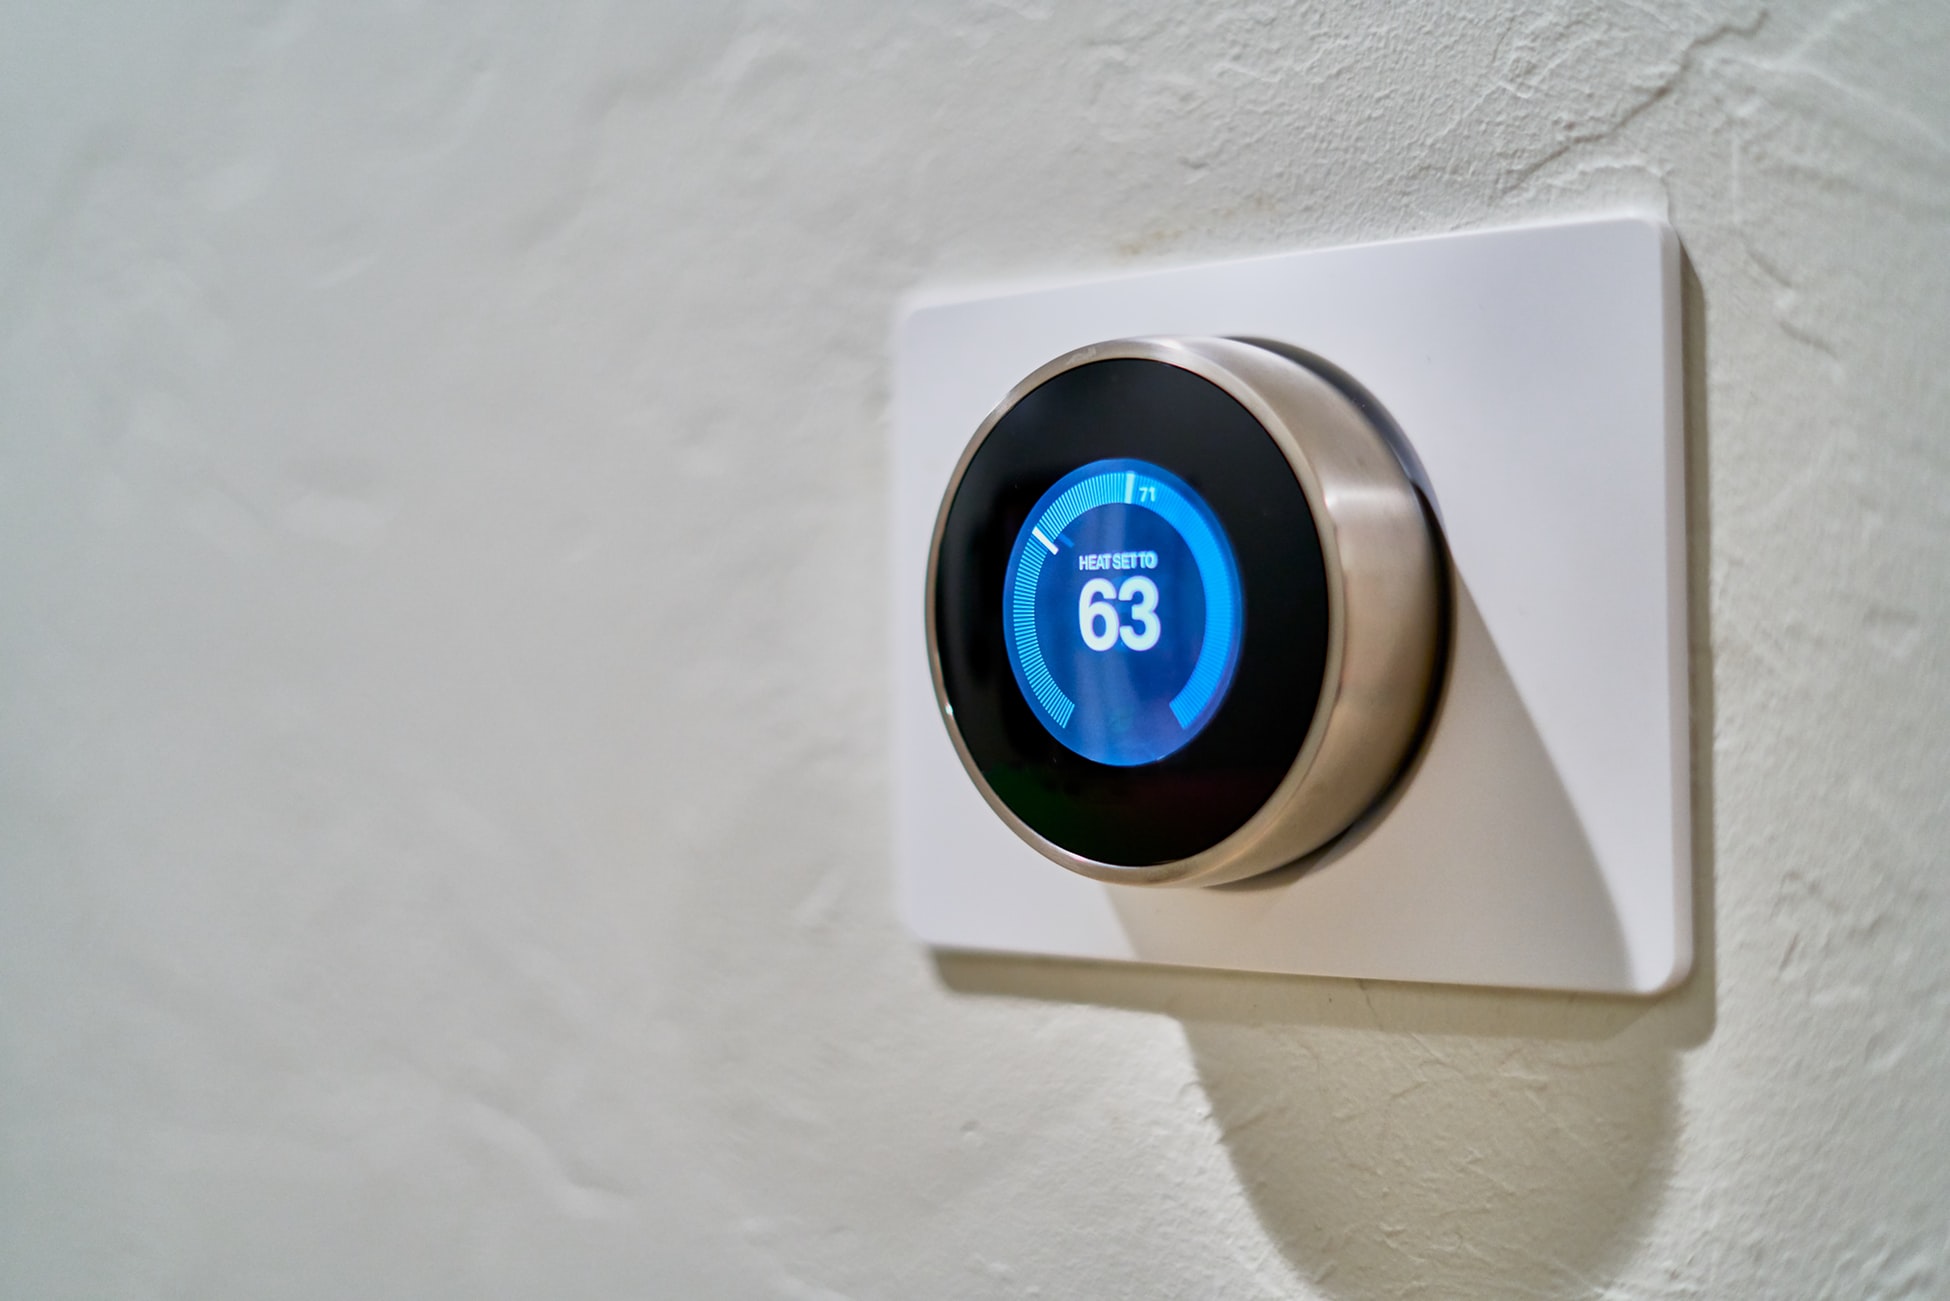 Shows a thermostat on a wall with a blue, digital display